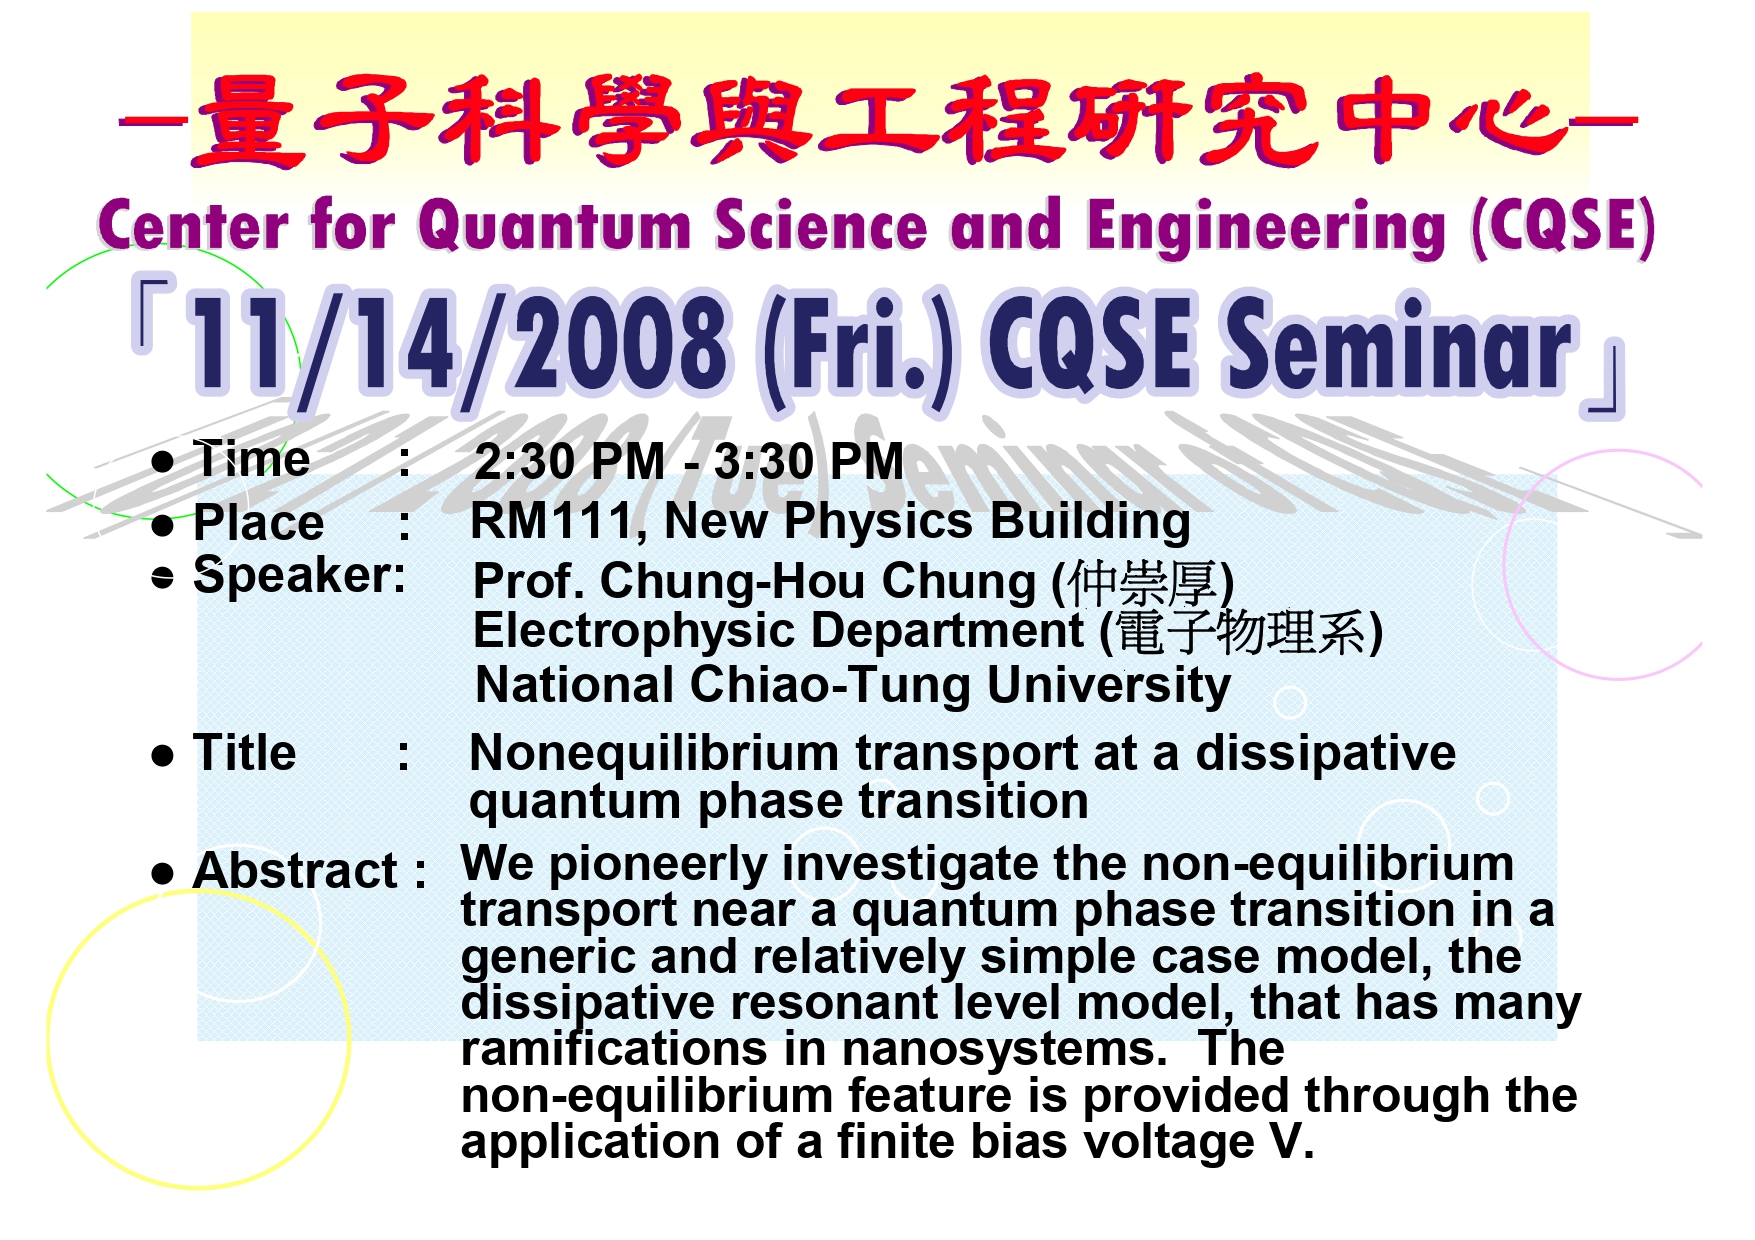 Seminar of Center for Quantum Science and Engineering